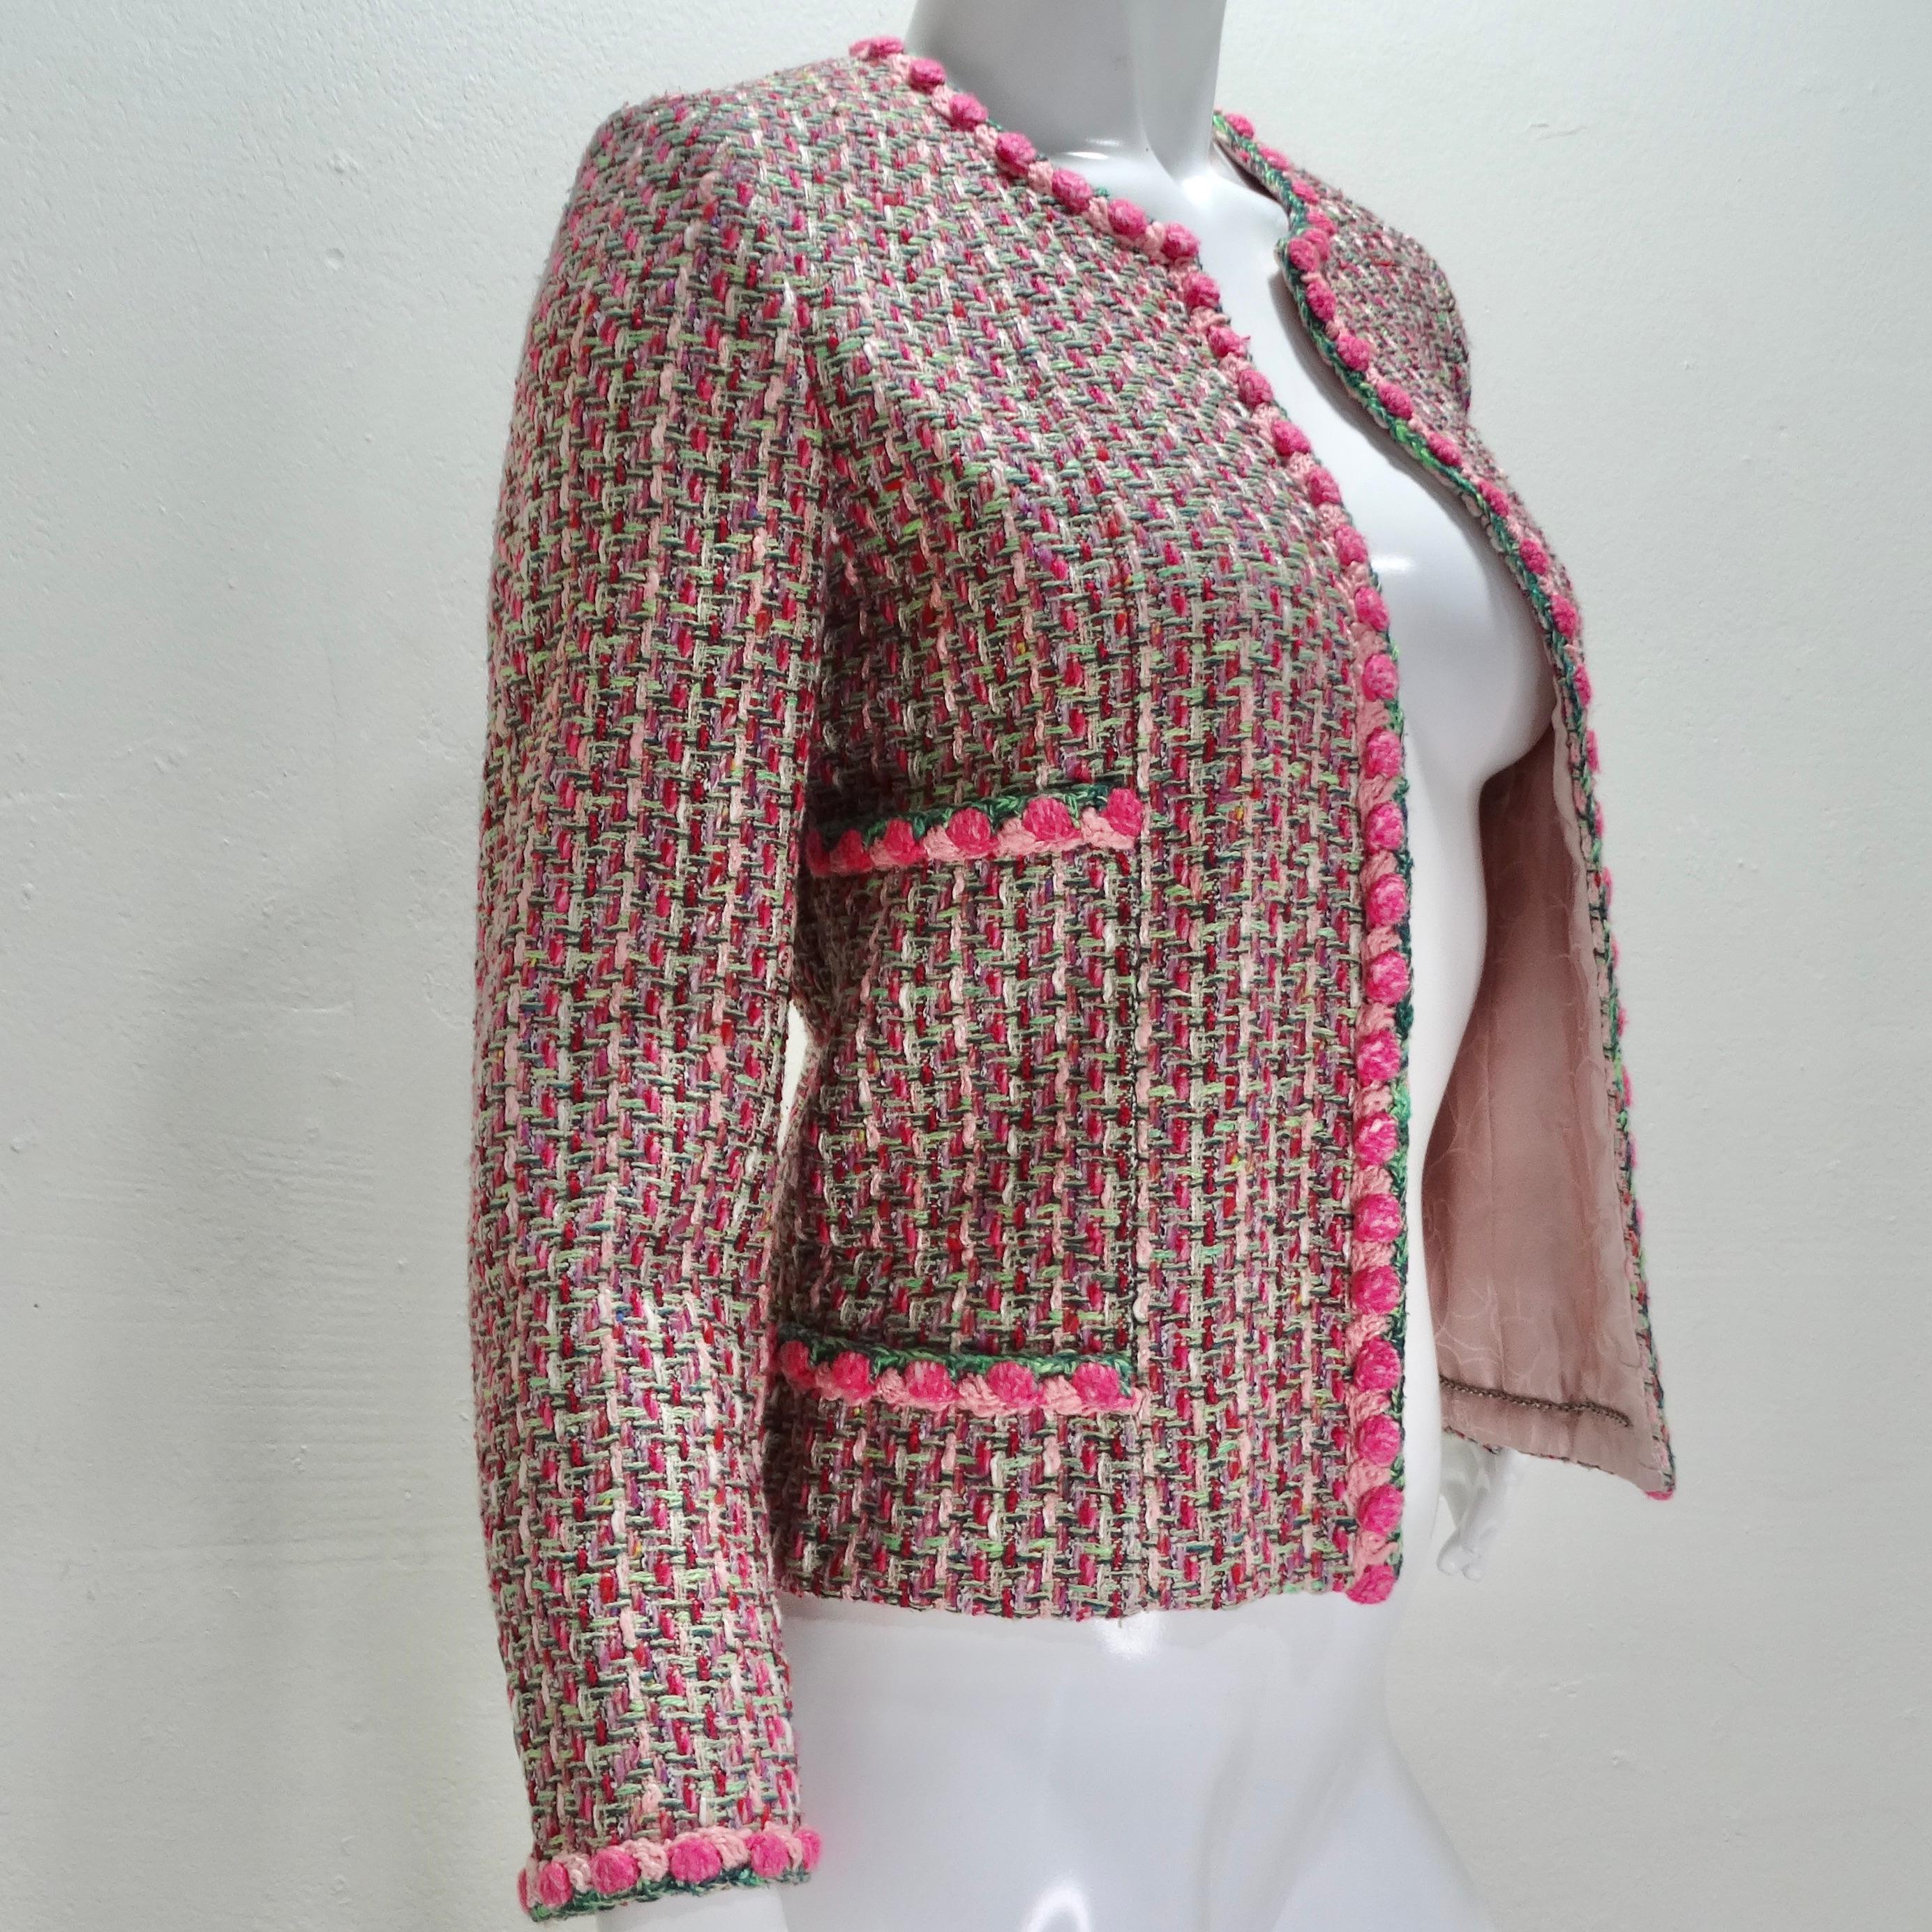 Introducing the exquisite Chanel 2002 Pink Tweed Evening Jacket, a timeless and feminine piece that exudes sophistication and elegance. Crafted from classic Chanel tweed in vibrant pink hues, this evening jacket is a true statement of luxury and